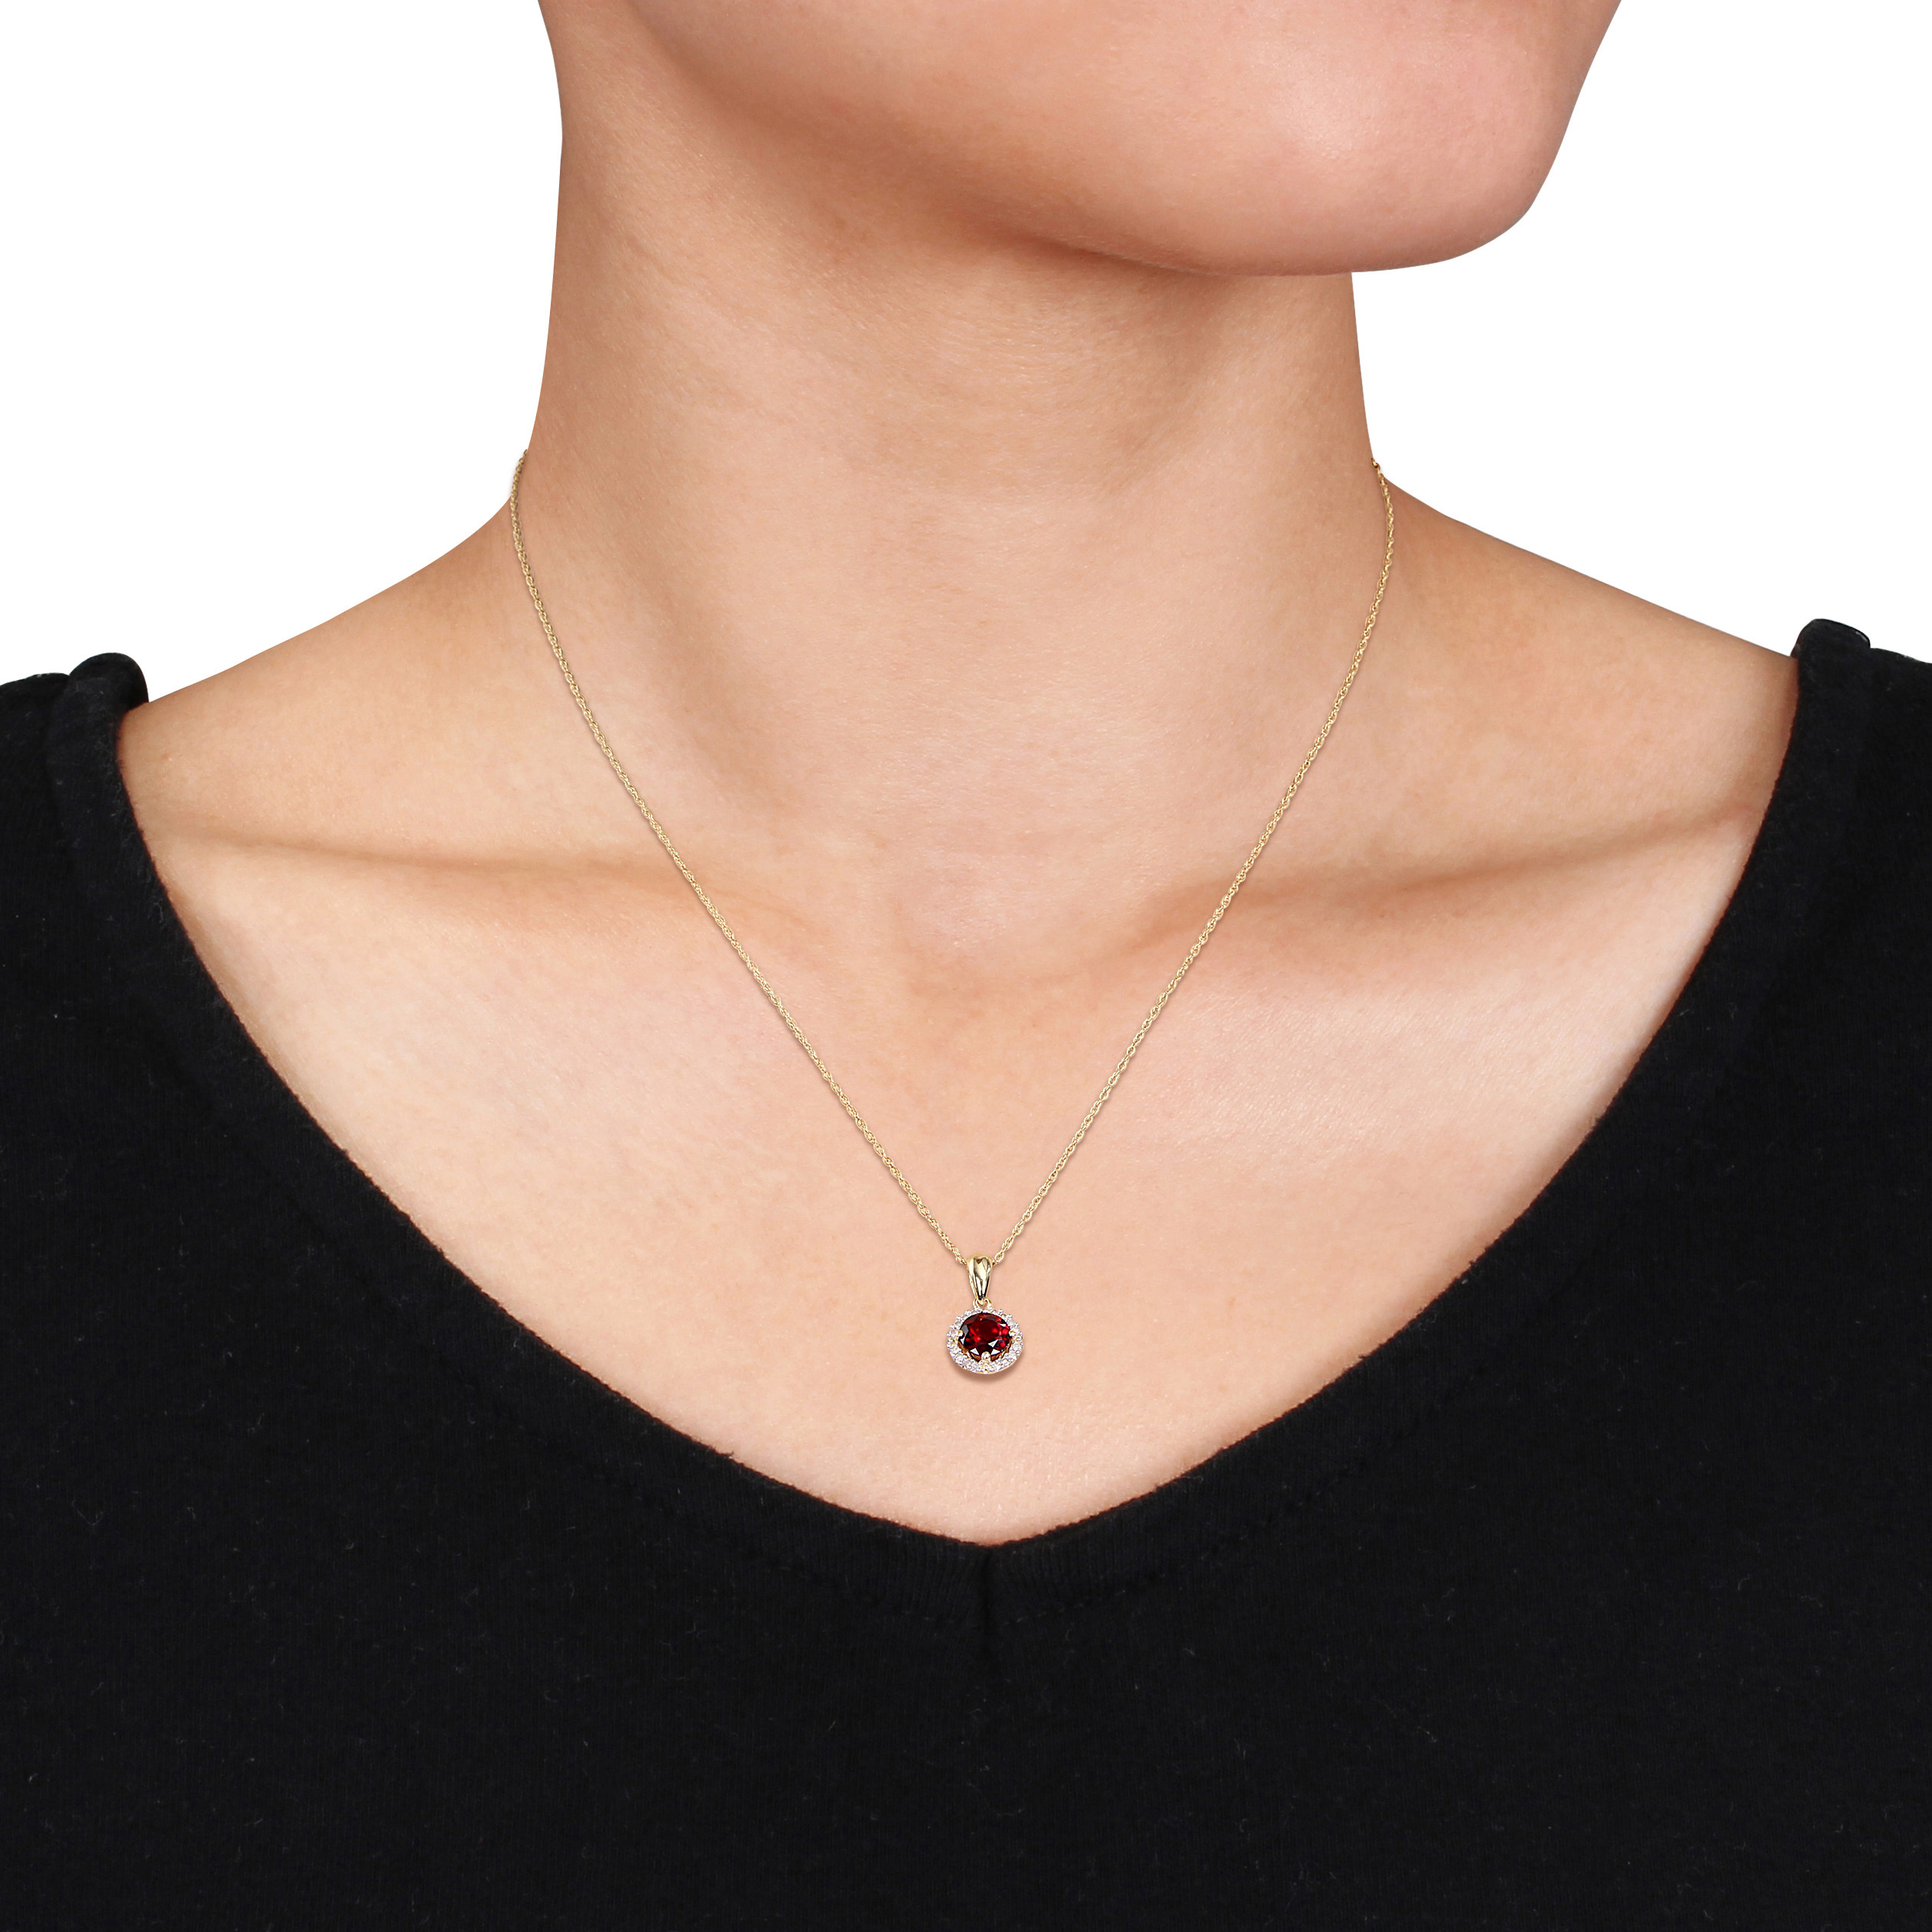 Garnet and 1/10 CT TW Diamond Halo Pendant with Chain in 10k Yellow Gold